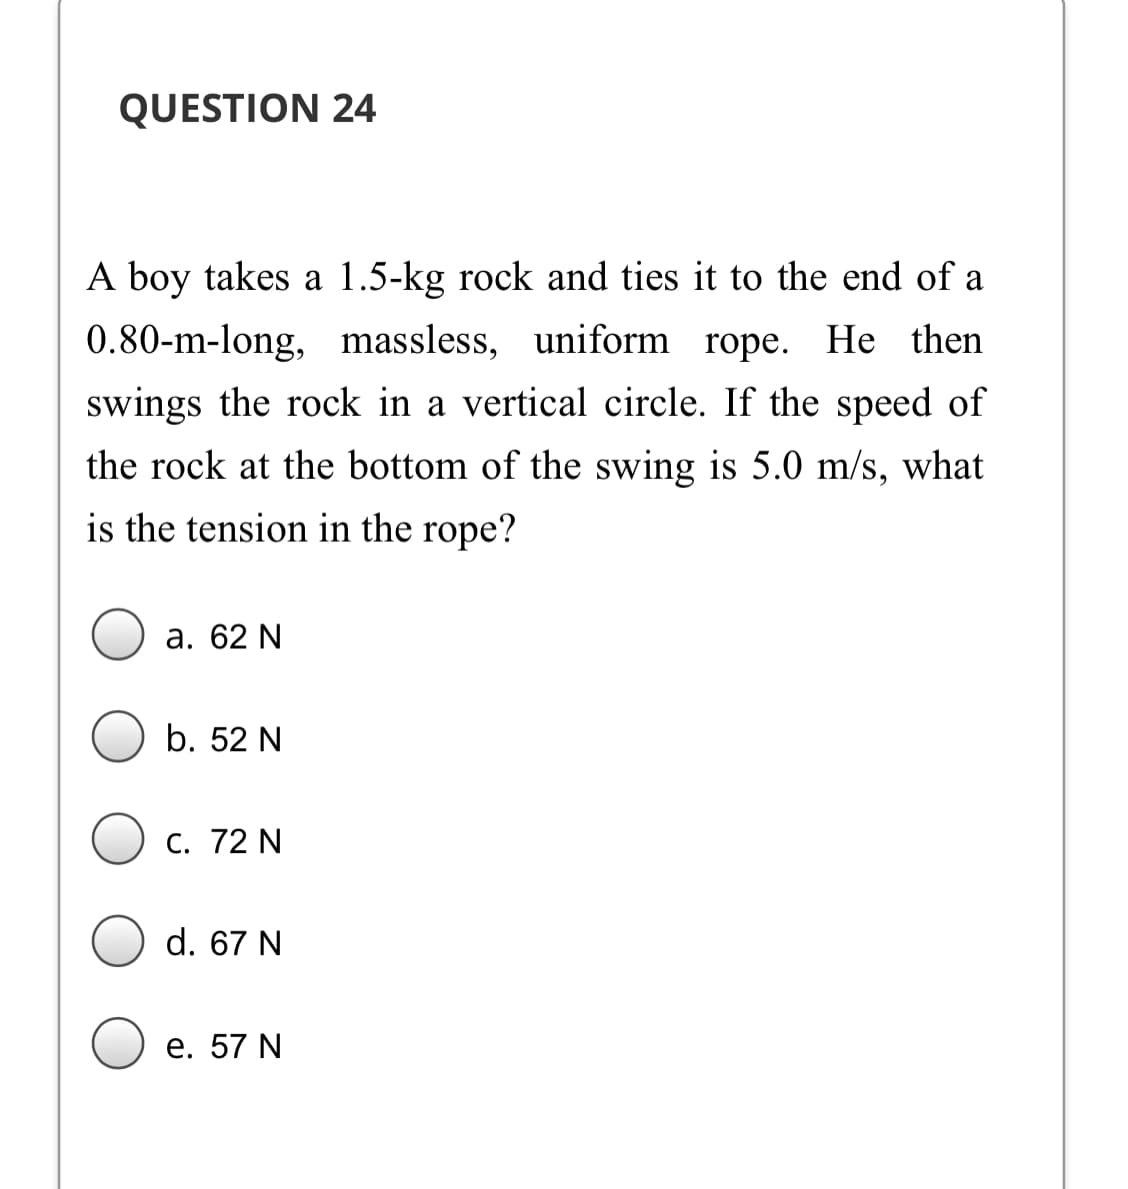 QUESTION 24
A boy takes a 1.5-kg rock and ties it to the end of a
0.80-m-long, massless, uniform rope. He then
swings the rock in a vertical circle. If the speed of
the rock at the bottom of the swing is 5.0 m/s, what
is the tension in the rope?
а. 62 N
b. 52 N
С. 72 N
d. 67 N
е. 57 N
